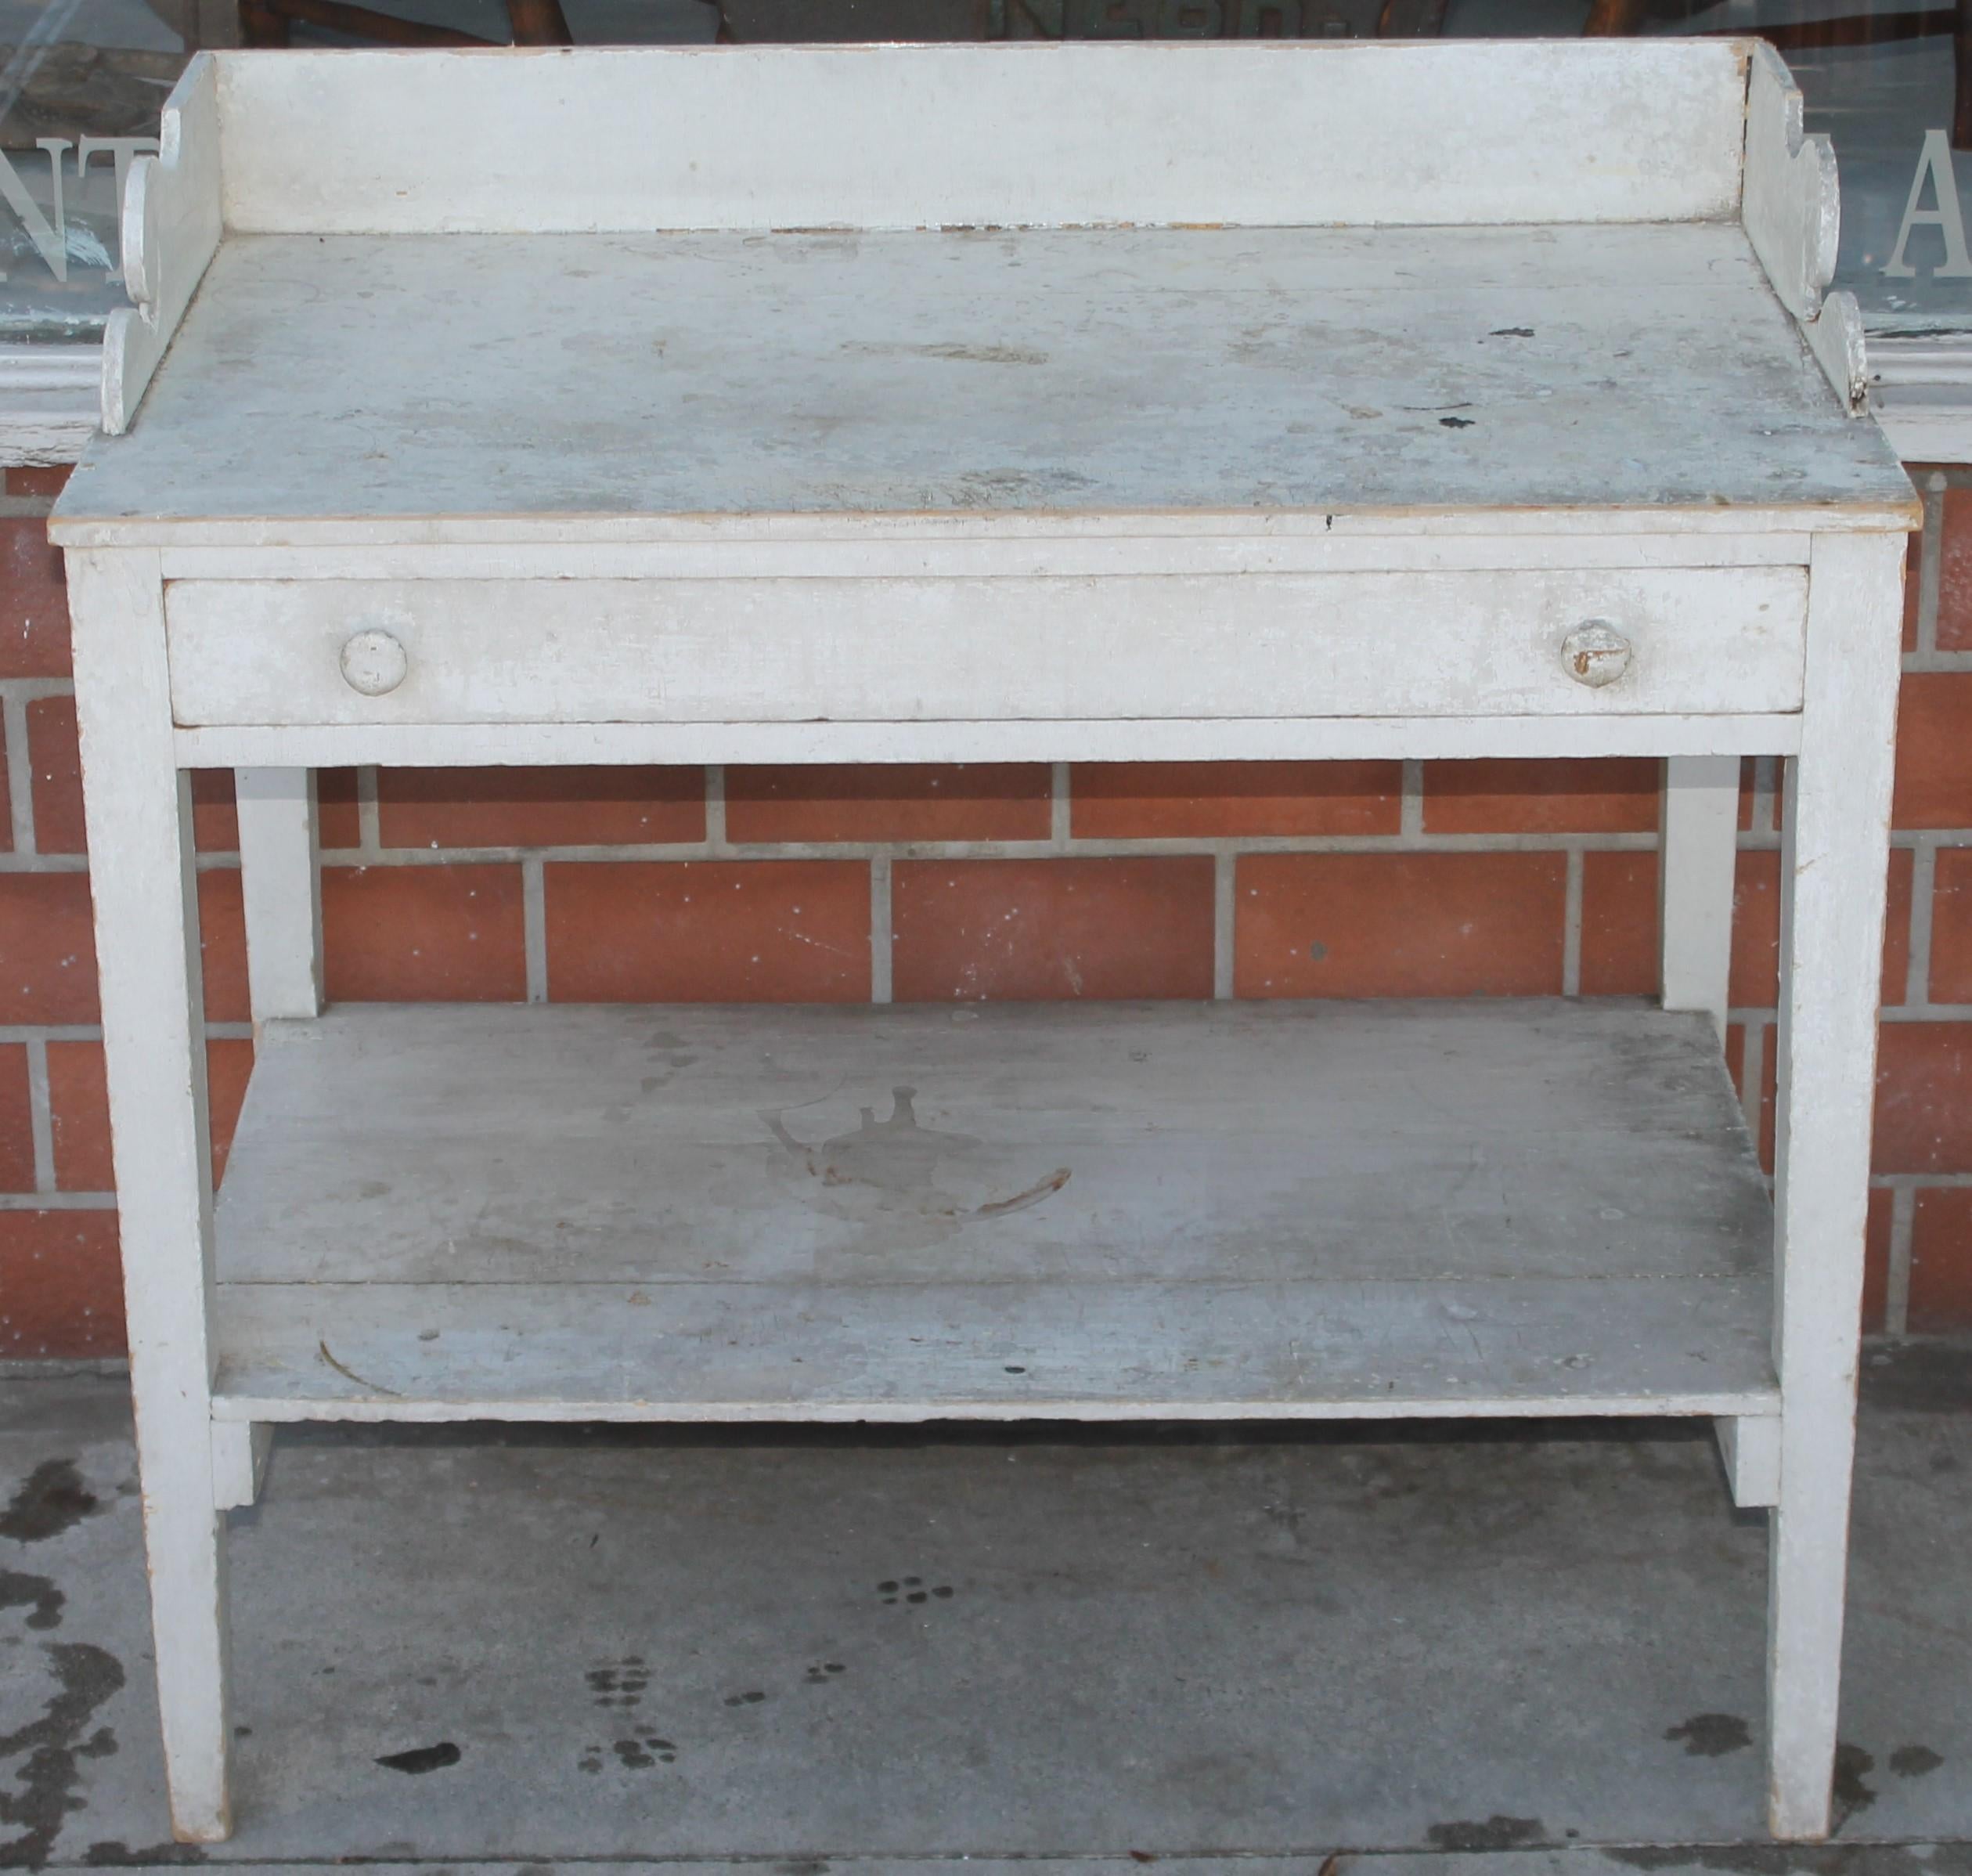 19thc Original white painted sideboard or server. This fine stand has one drawer and all original dovetailed case or splash. This is a very early sturdy table.